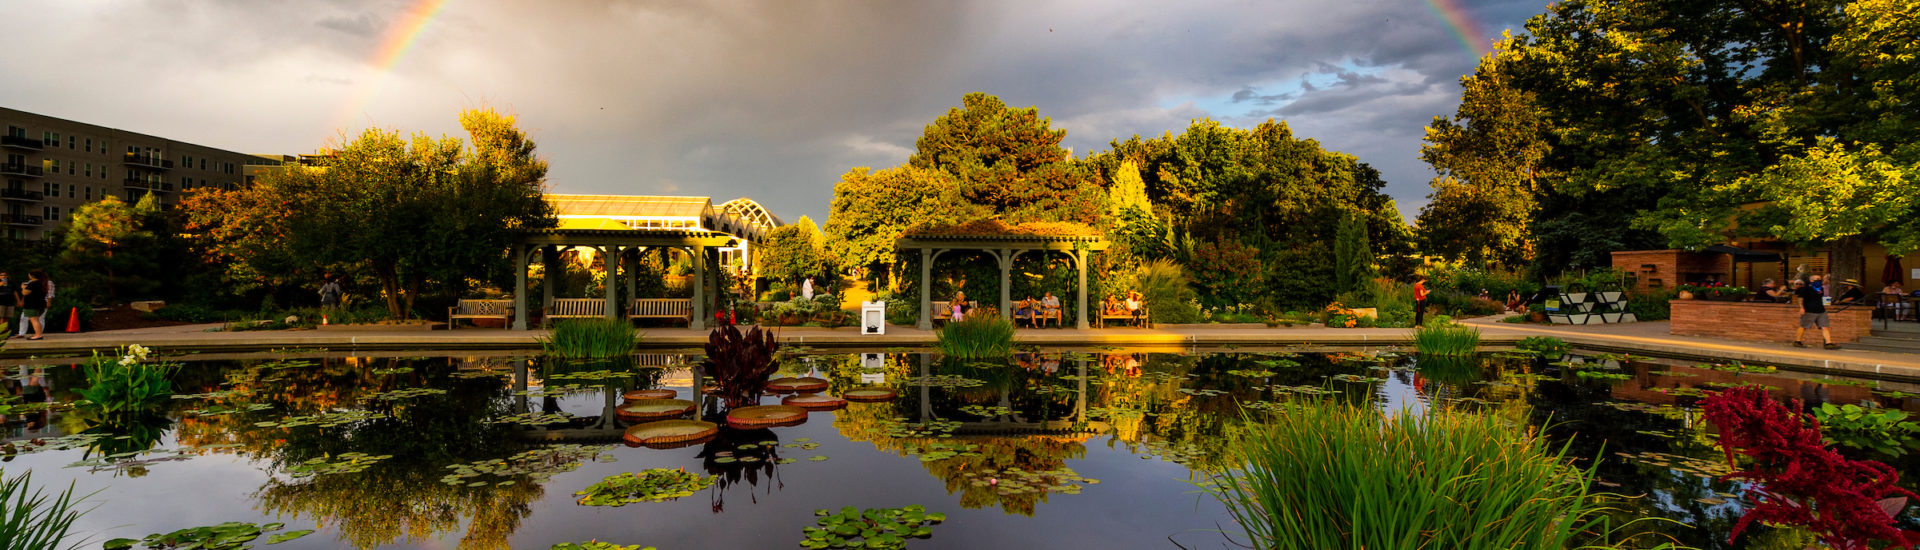 A rainbow in a cloudy sky over a garden with a large pond and pergolas